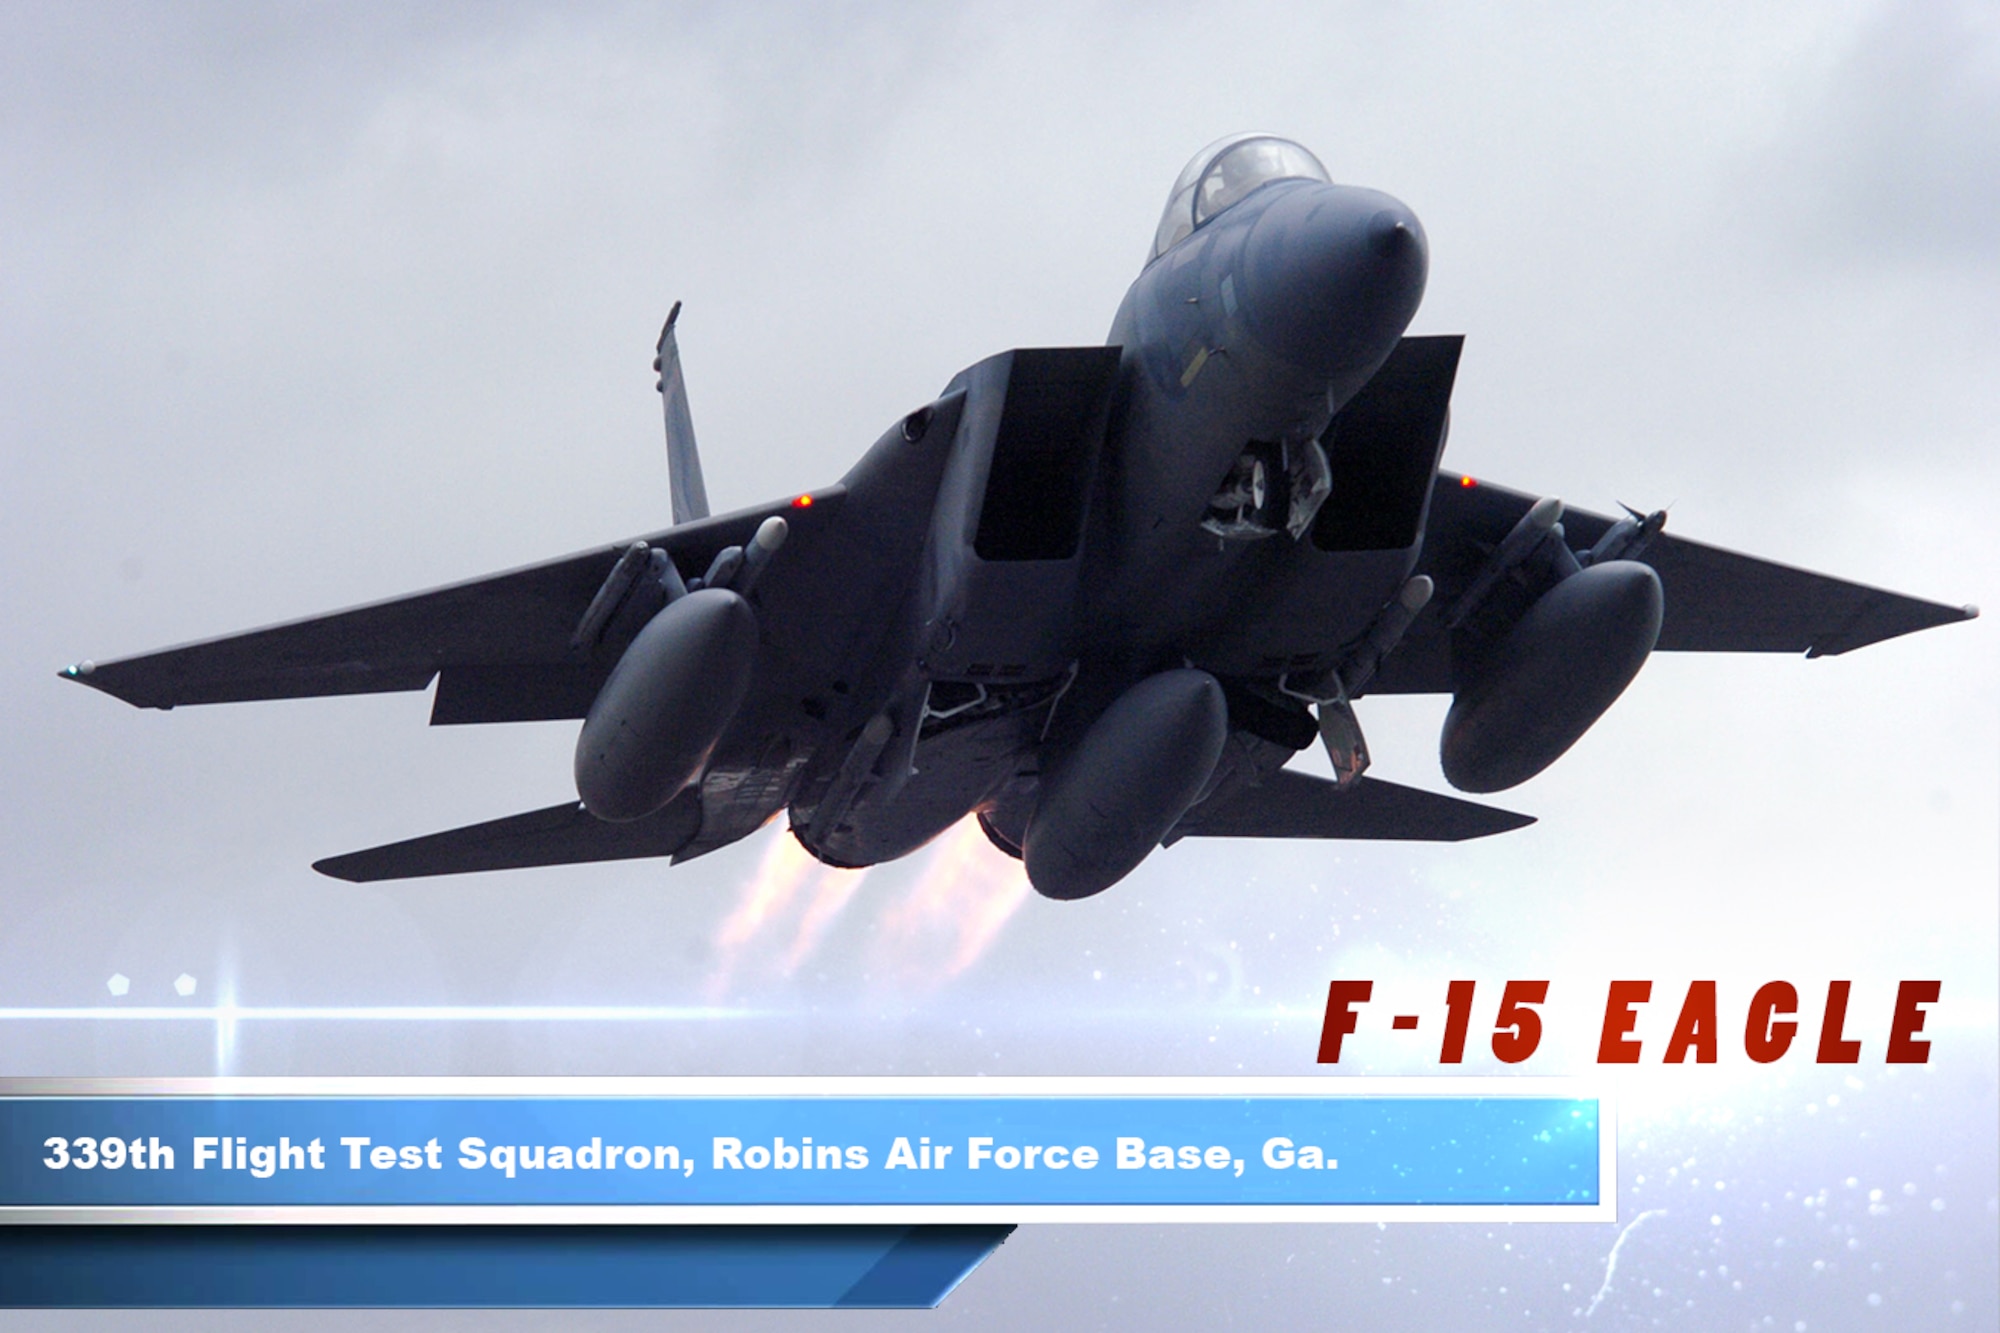 The F-15 Eagle is an all-weather, extremely maneuverable, tactical fighter designed to permit the Air Force to gain and maintain air supremacy over the battlefield. 